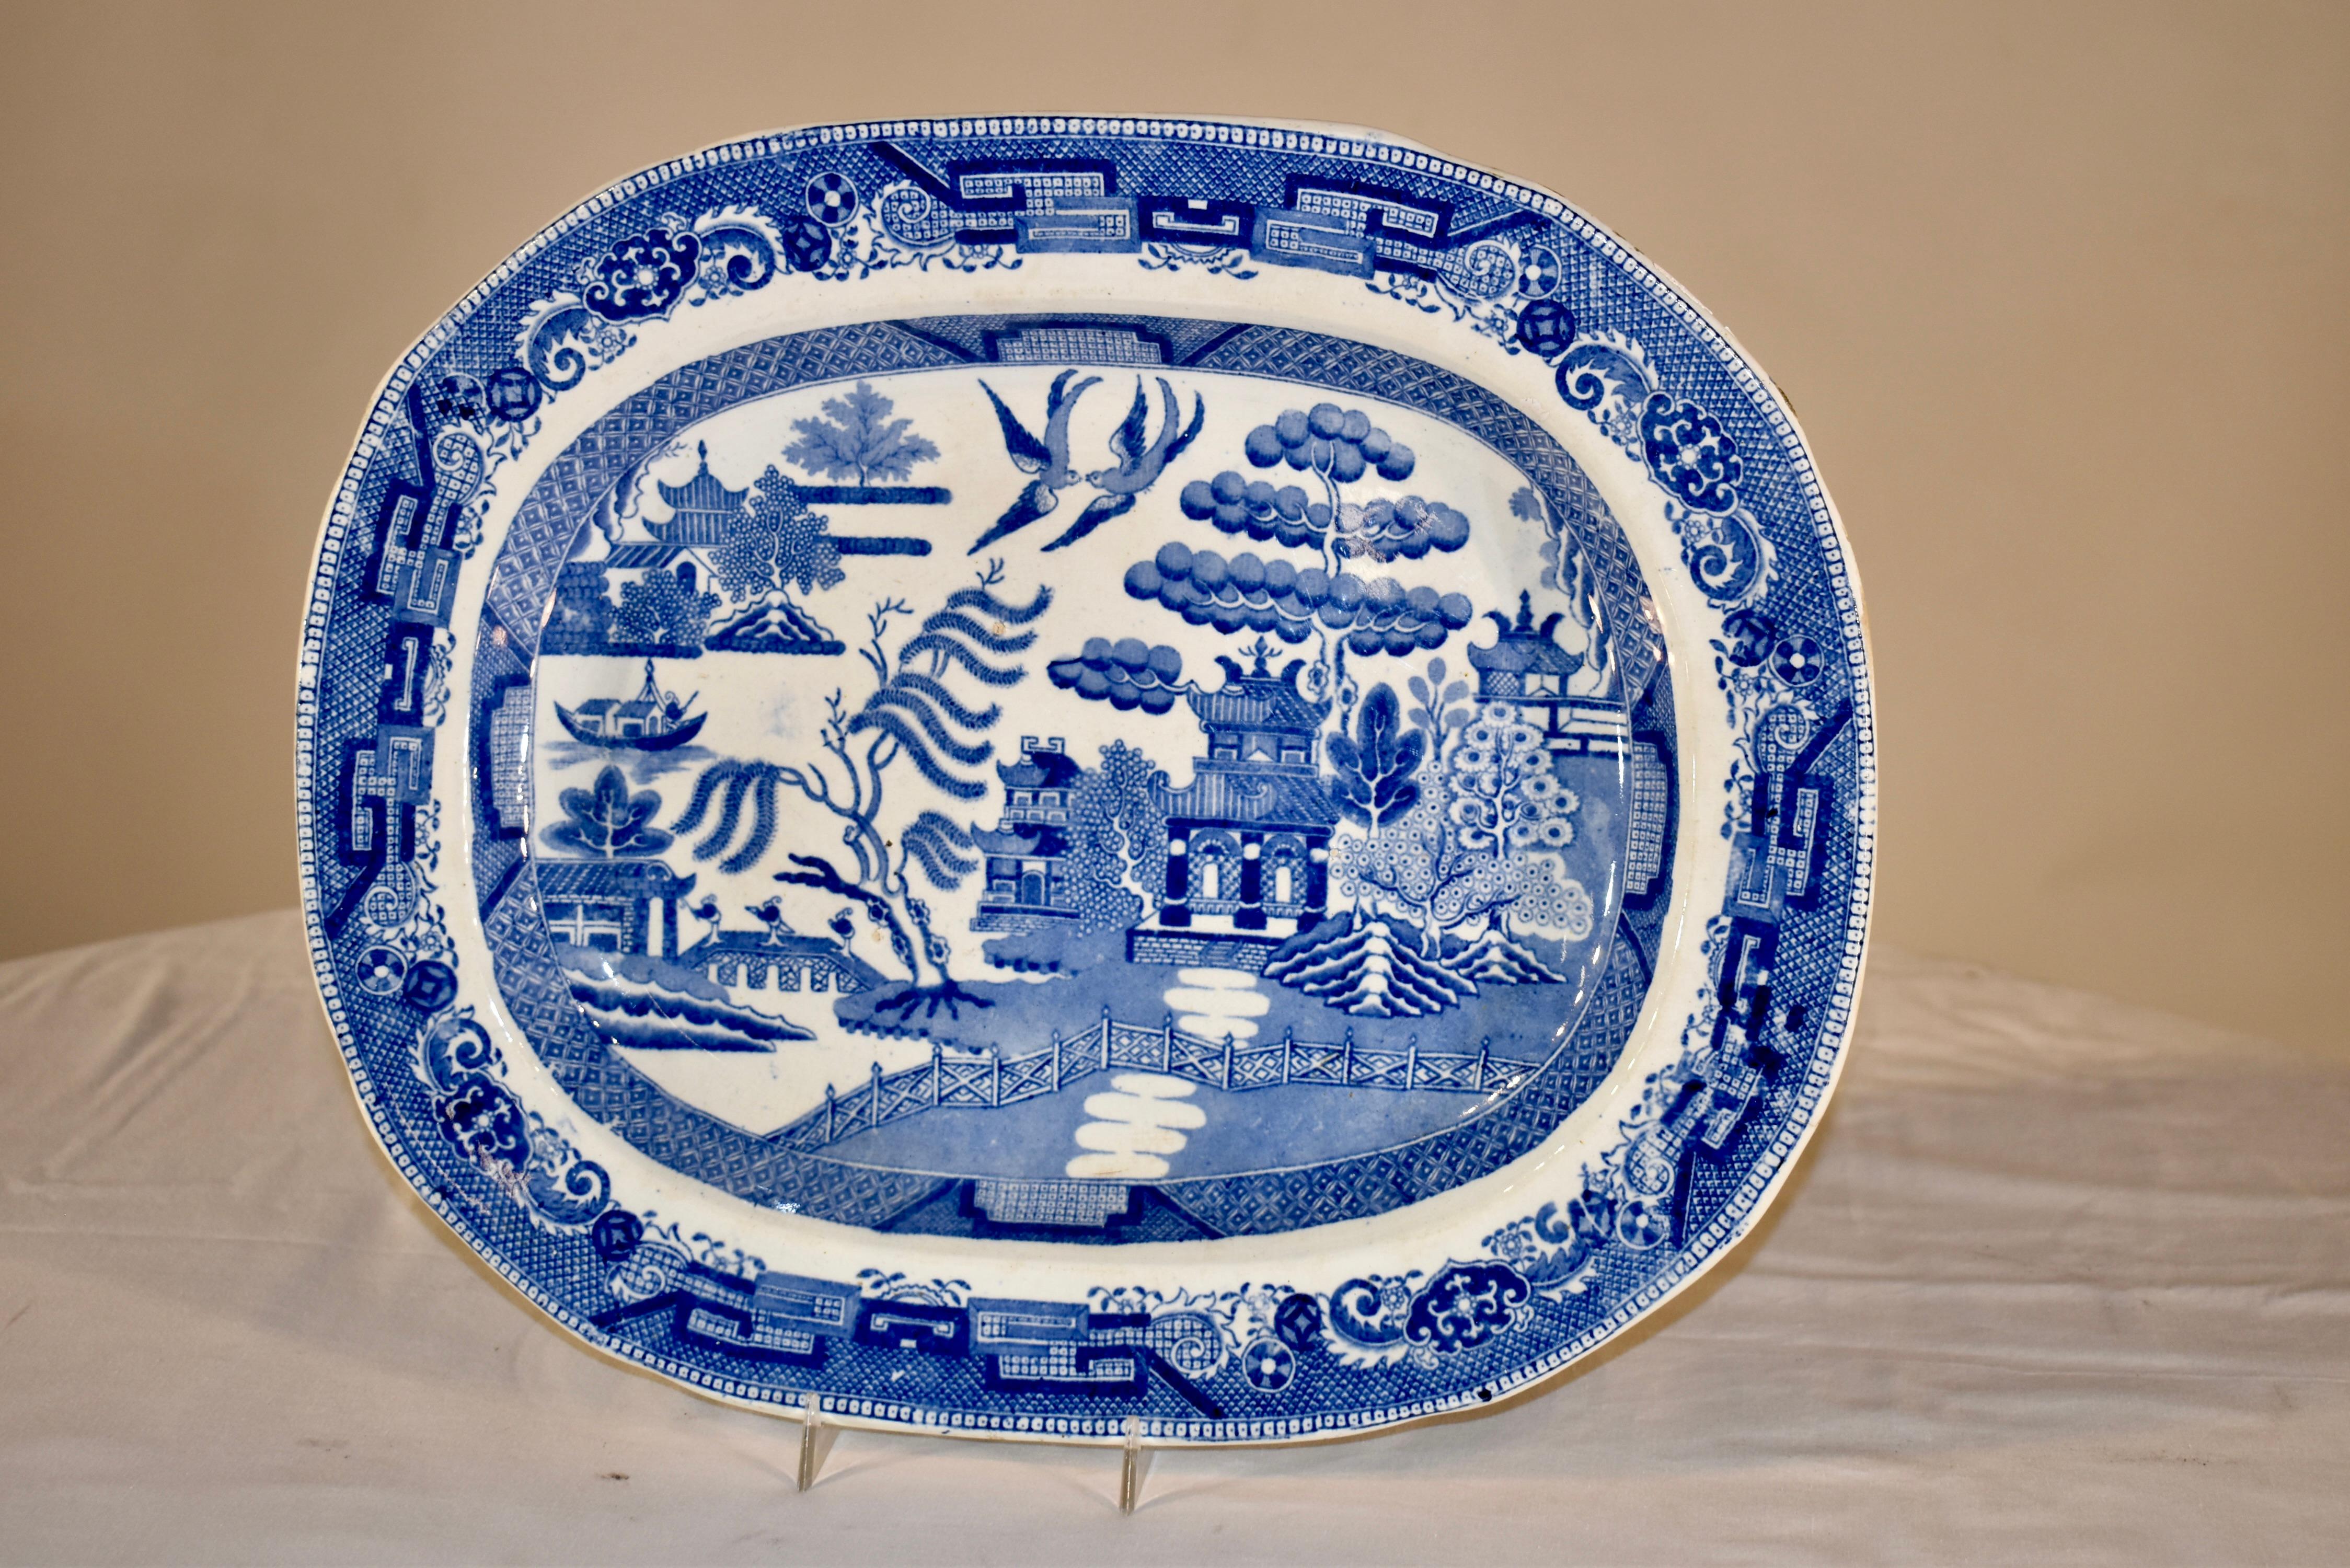 19th century English platter in the highly collectible 